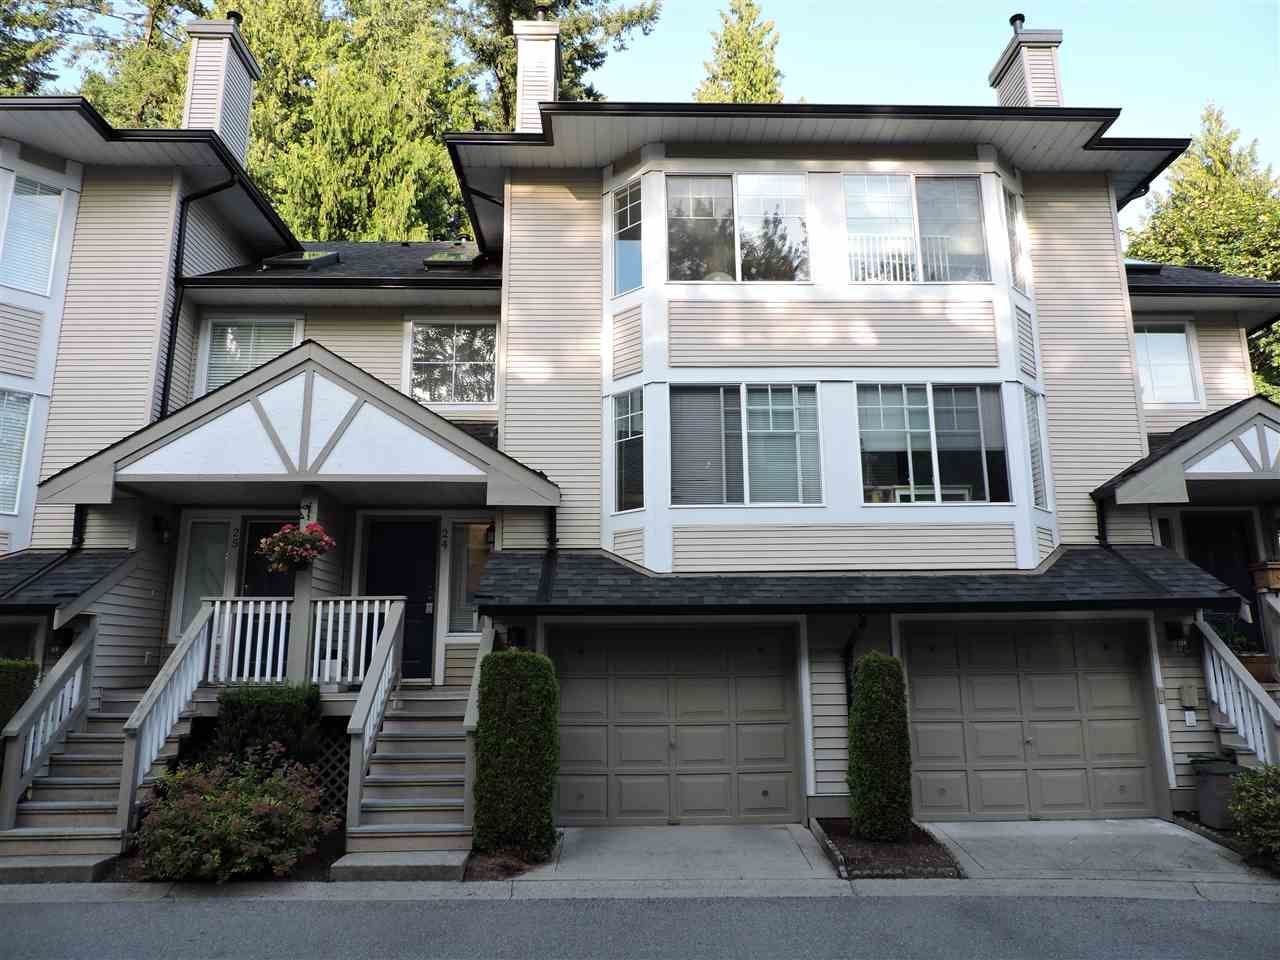 Main Photo: 24 7640 BLOTT STREET in Mission: Mission BC Townhouse for sale : MLS®# R2469418